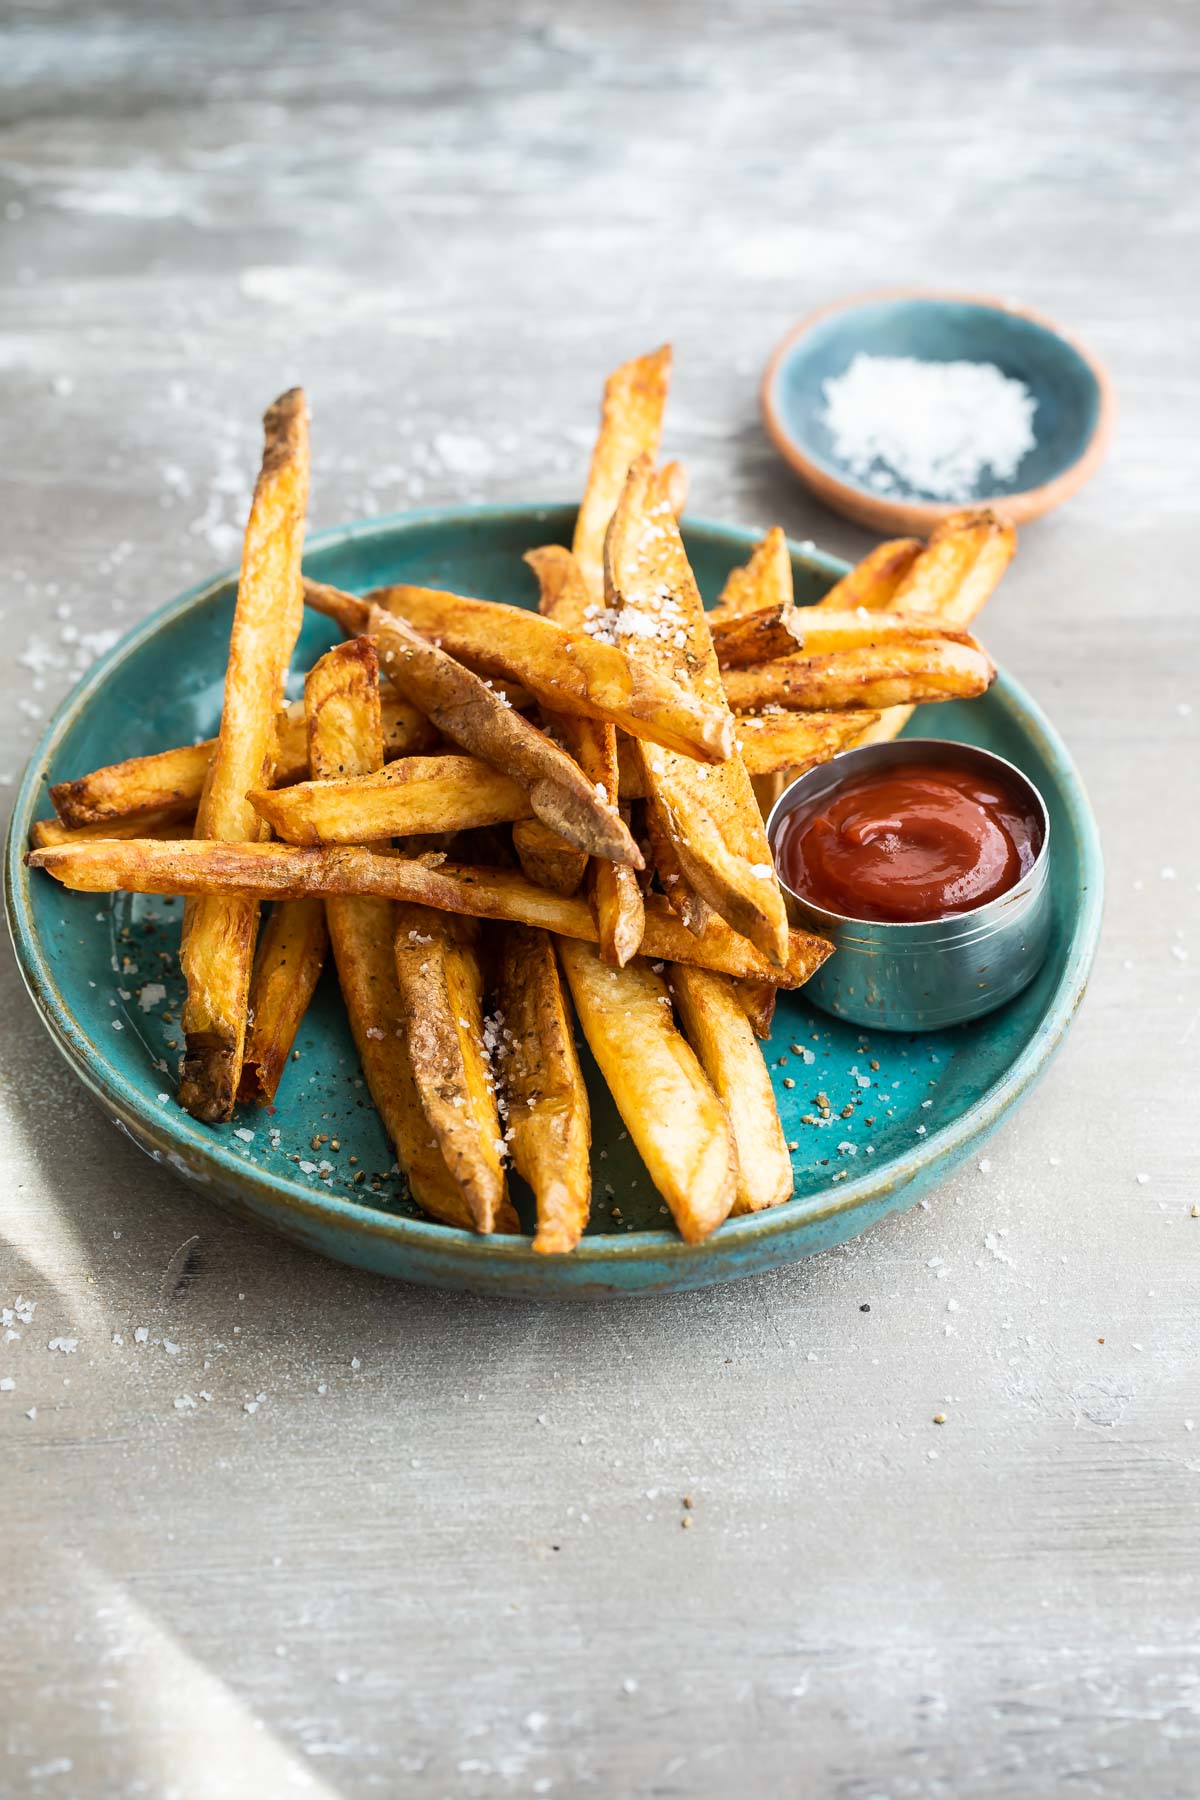 Homemade French fries on a teal plate with ketchup.